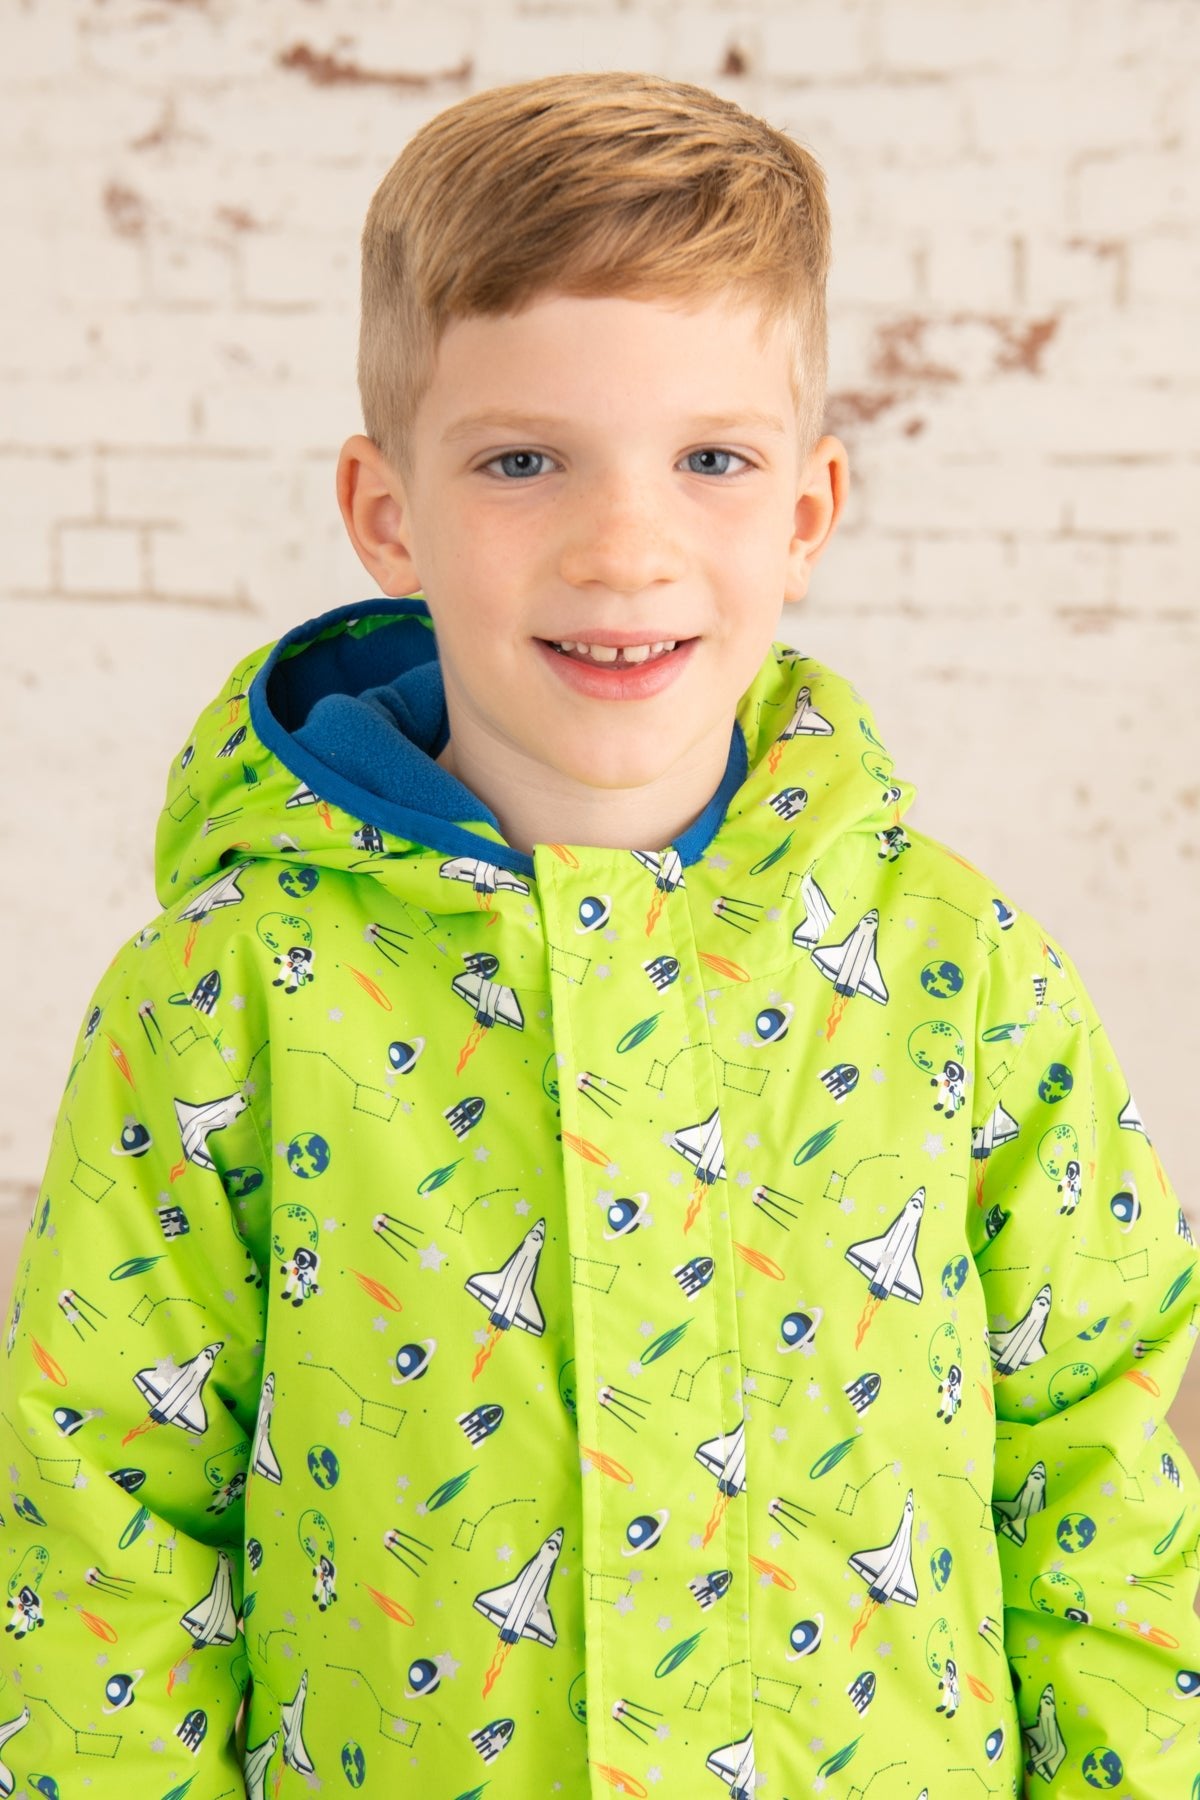 Finlay Coat - Lime Space Print